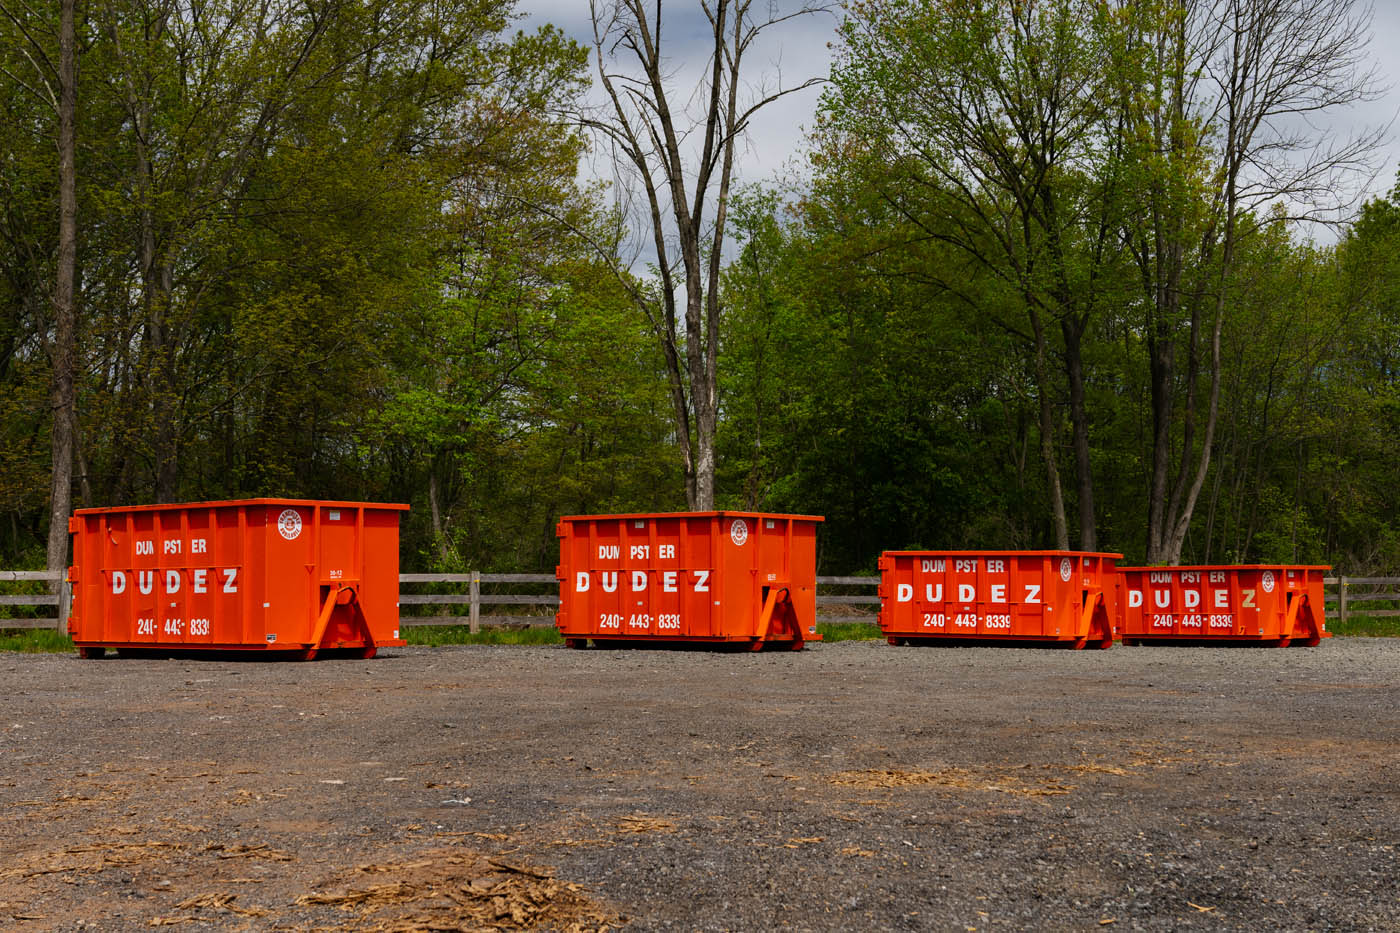 Multiple Dumpster Dudez rental dumpster sizes - learn how we can streamline your project with garbage haulers.